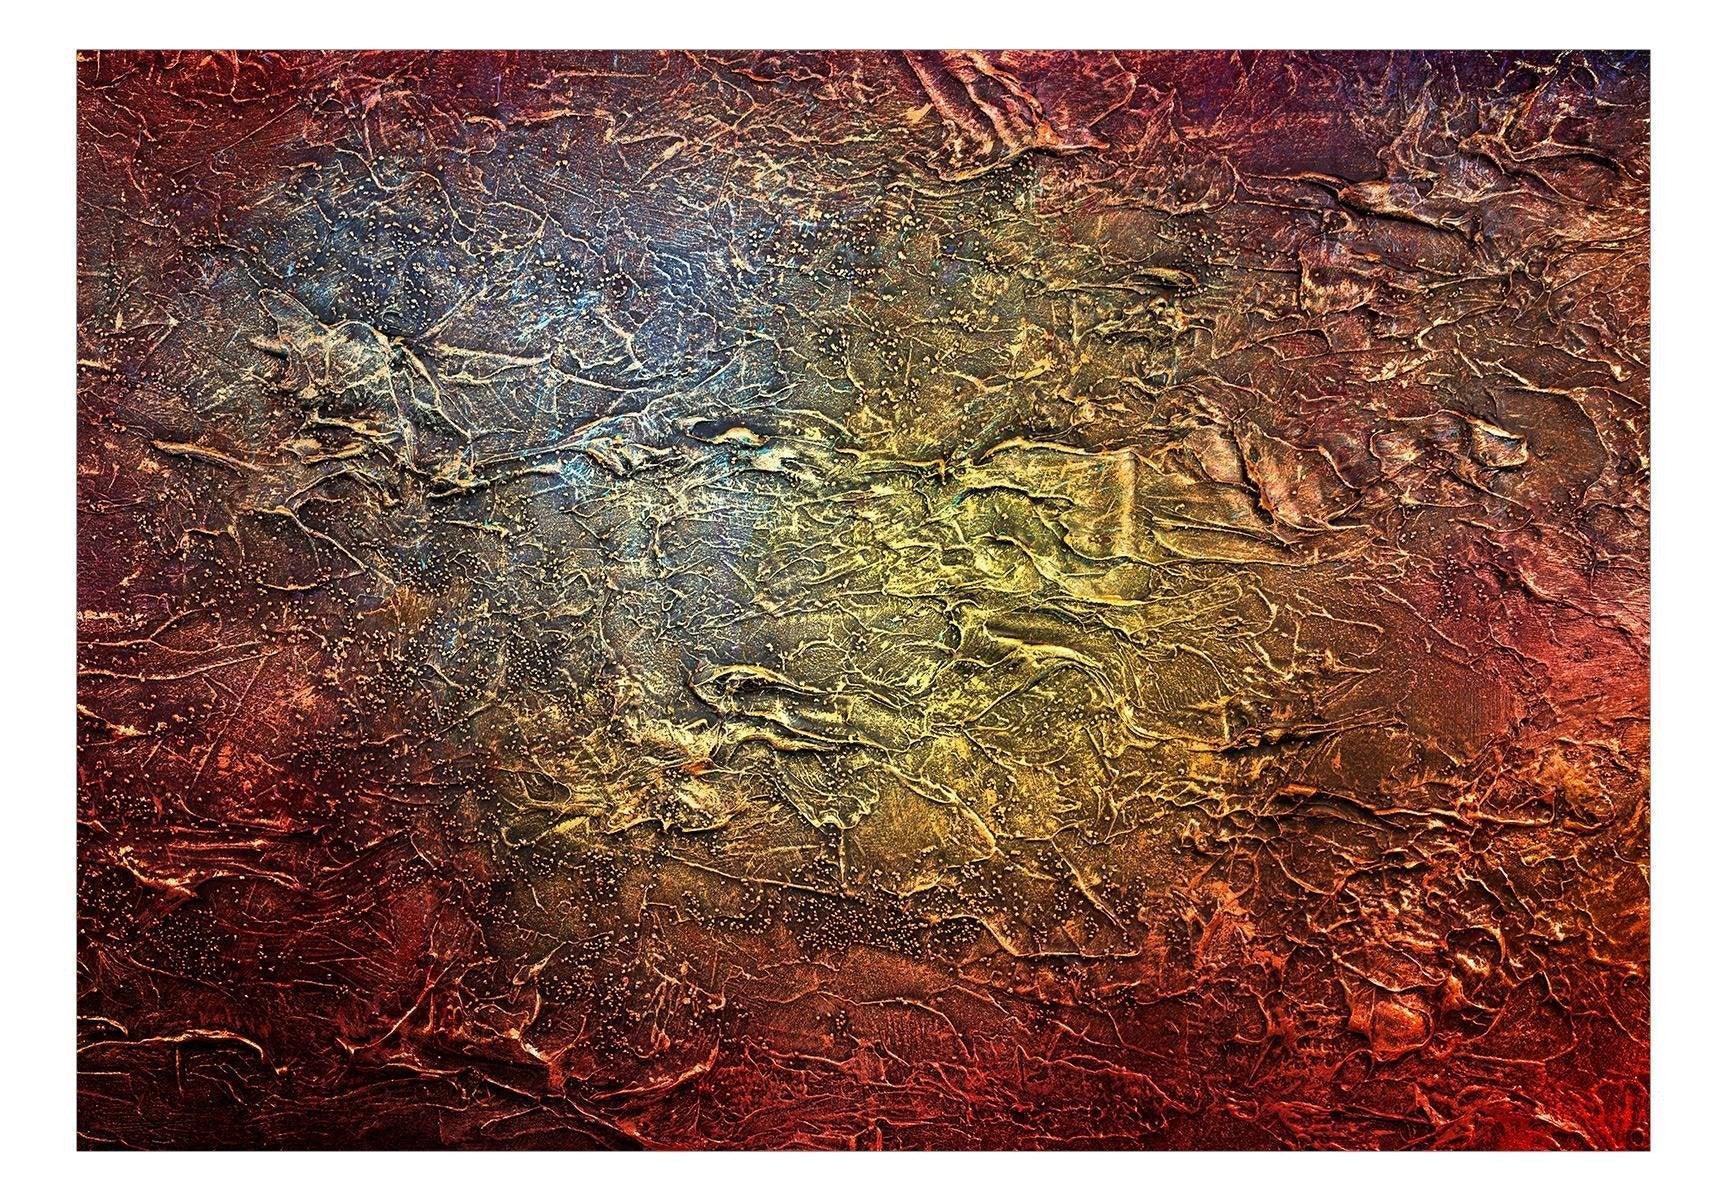 Peel and stick wall mural - Red Gold - www.trendingbestsellers.com